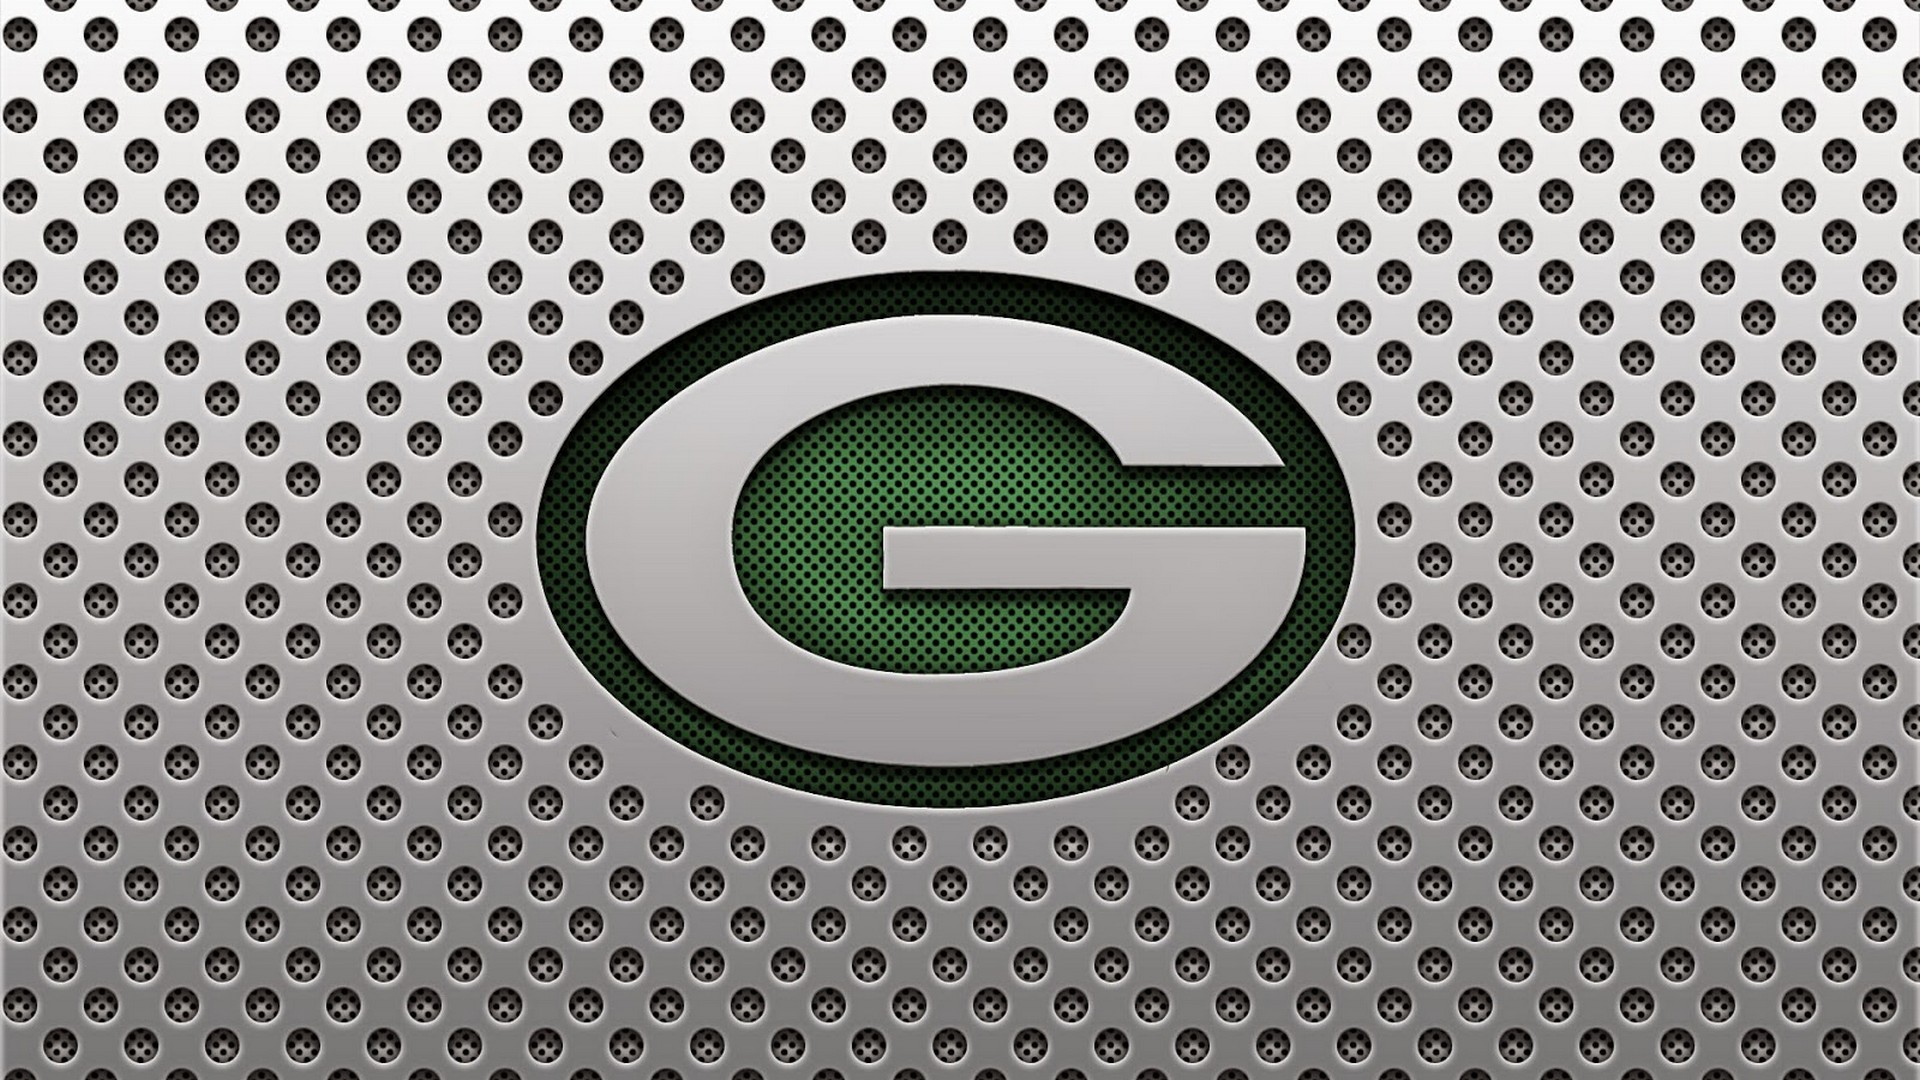 Green Bay Packers NFL Wallpaper For Mac Backgrounds with resolution 1920x1080 pixel. You can make this wallpaper for your Mac or Windows Desktop Background, iPhone, Android or Tablet and another Smartphone device